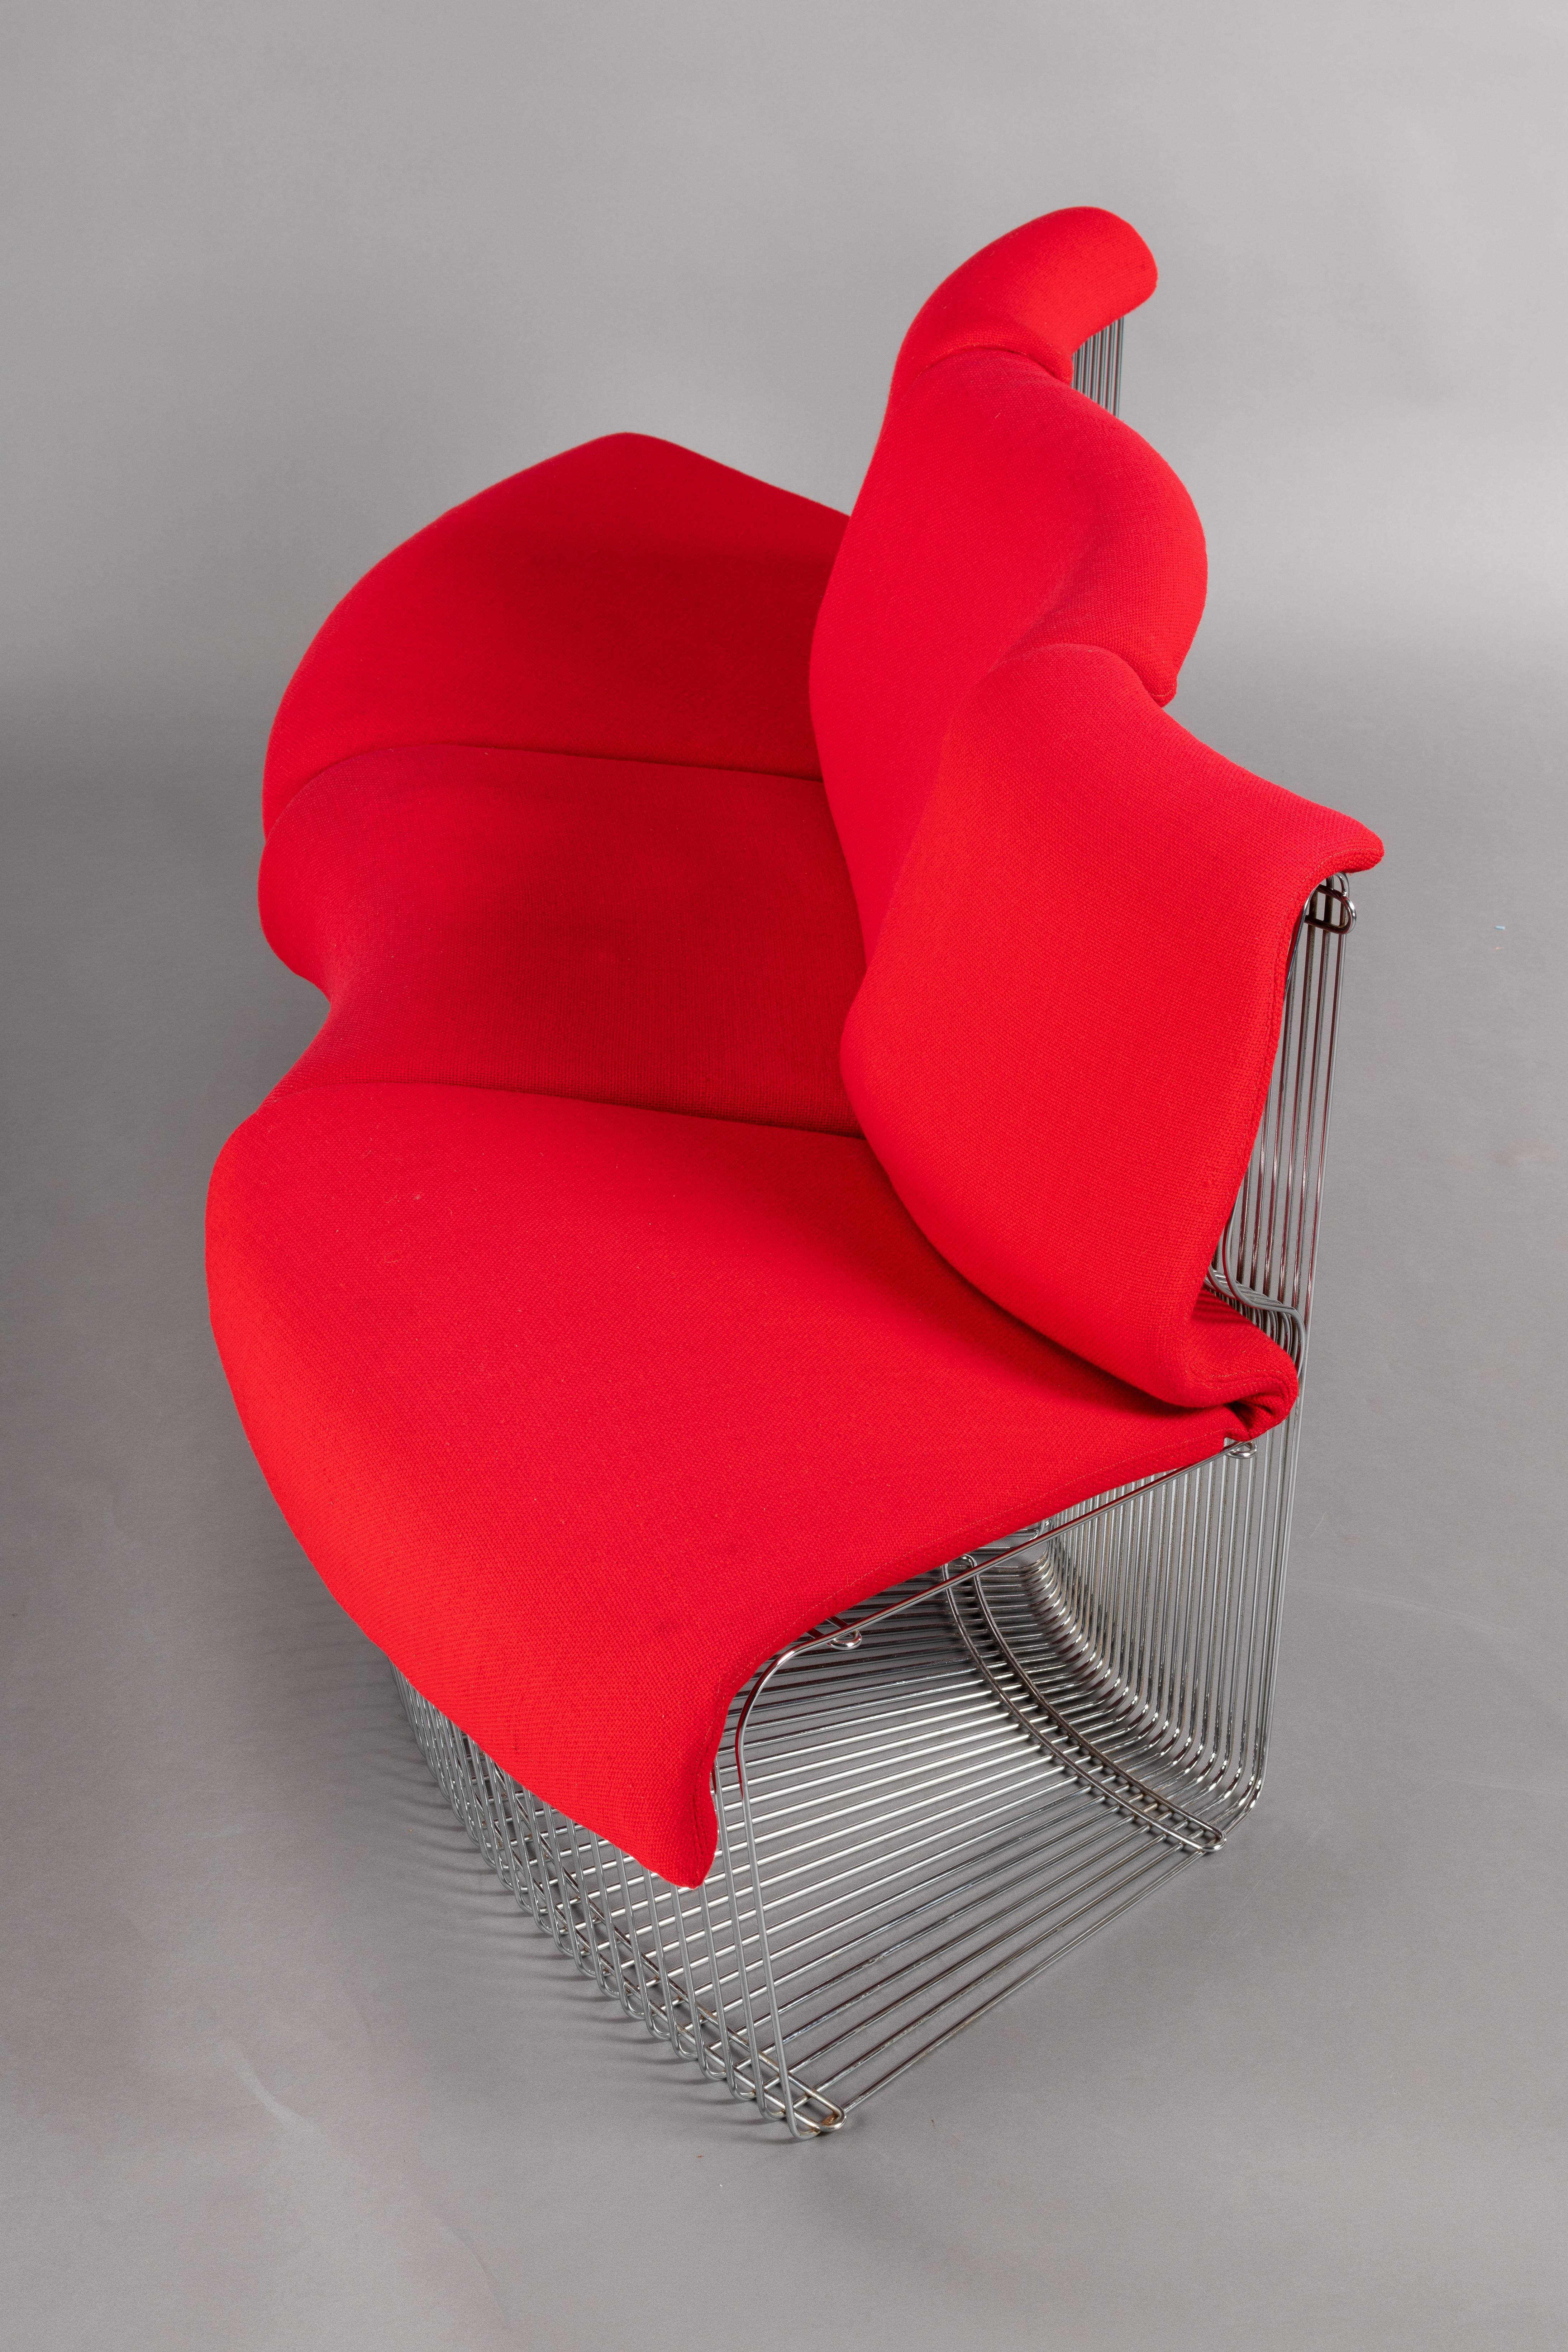 This early production Pantonova three-seat sofa was designed by Verner Panton for Fritz Hansen in 1971. It has the Danish export label with the date of May 1973. It is made from steel and upholstered in the original red woollen fabric. Minor wear